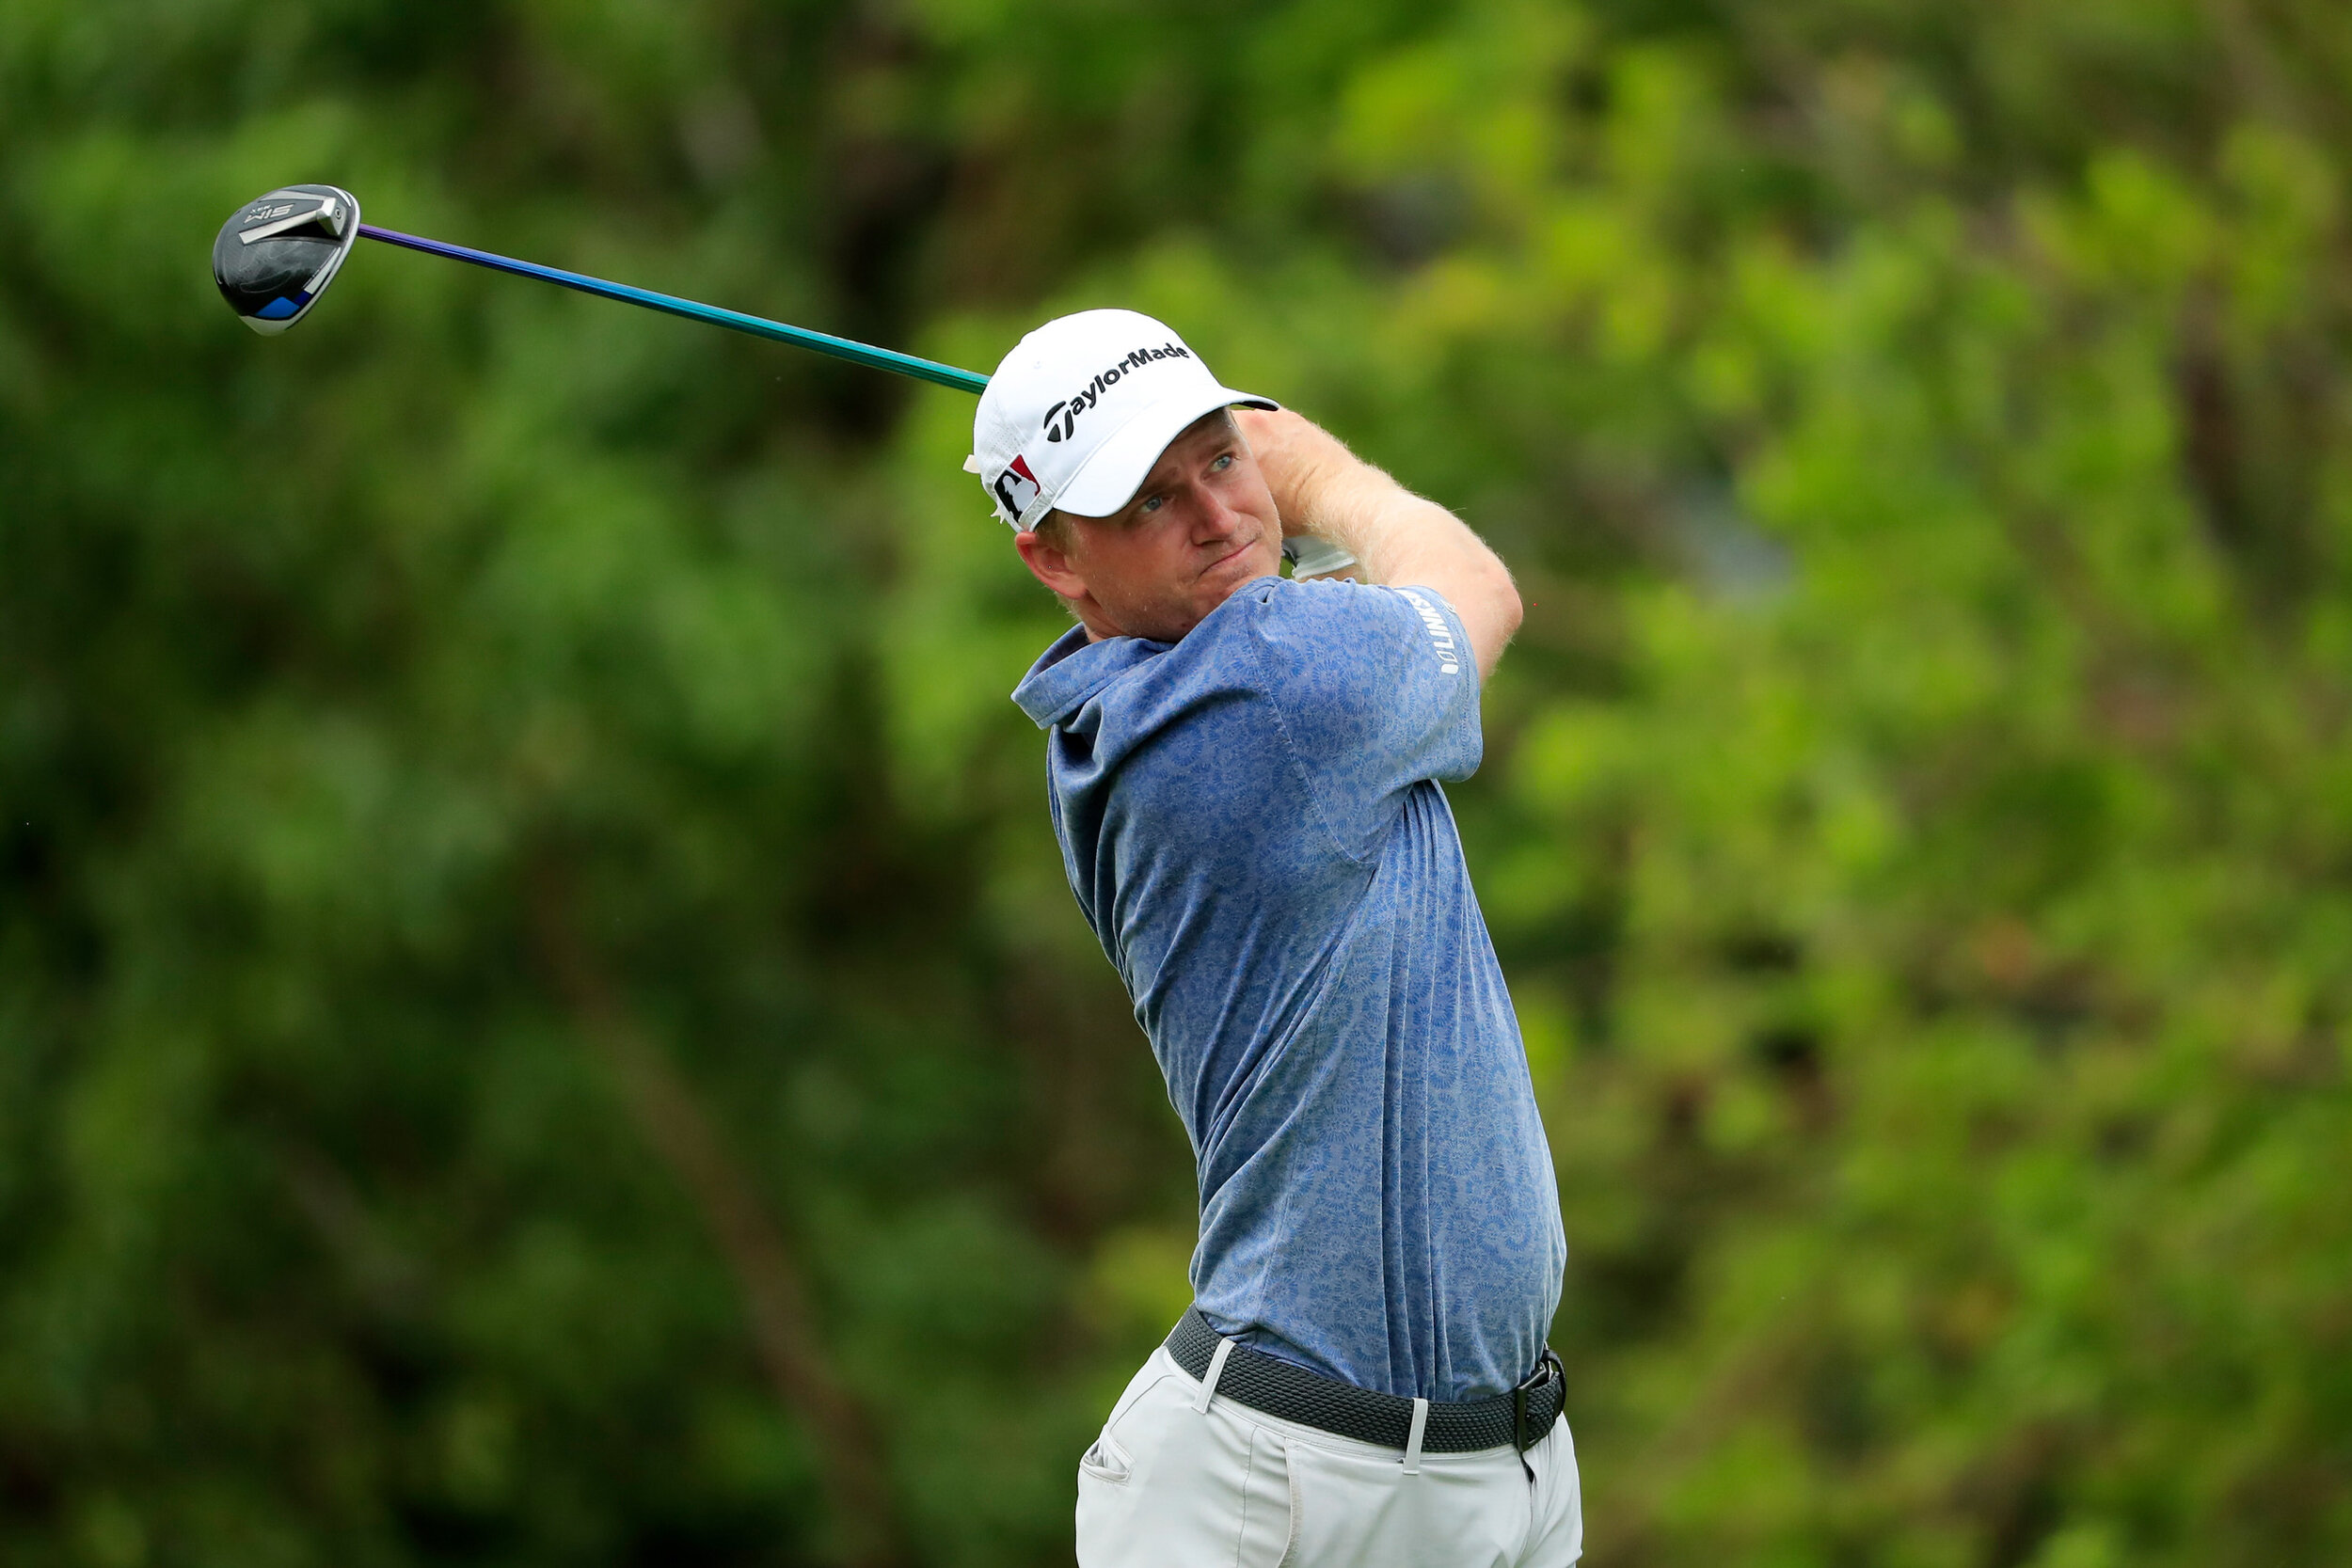  PLAYA DEL CARMEN, MEXICO - DECEMBER 06: Adam Long of the United States plays his shot from the second tee during the final round of the Mayakoba Golf Classic at El Camaleón Golf Club on December 06, 2020 in Playa del Carmen, Mexico. (Photo by Cliff 